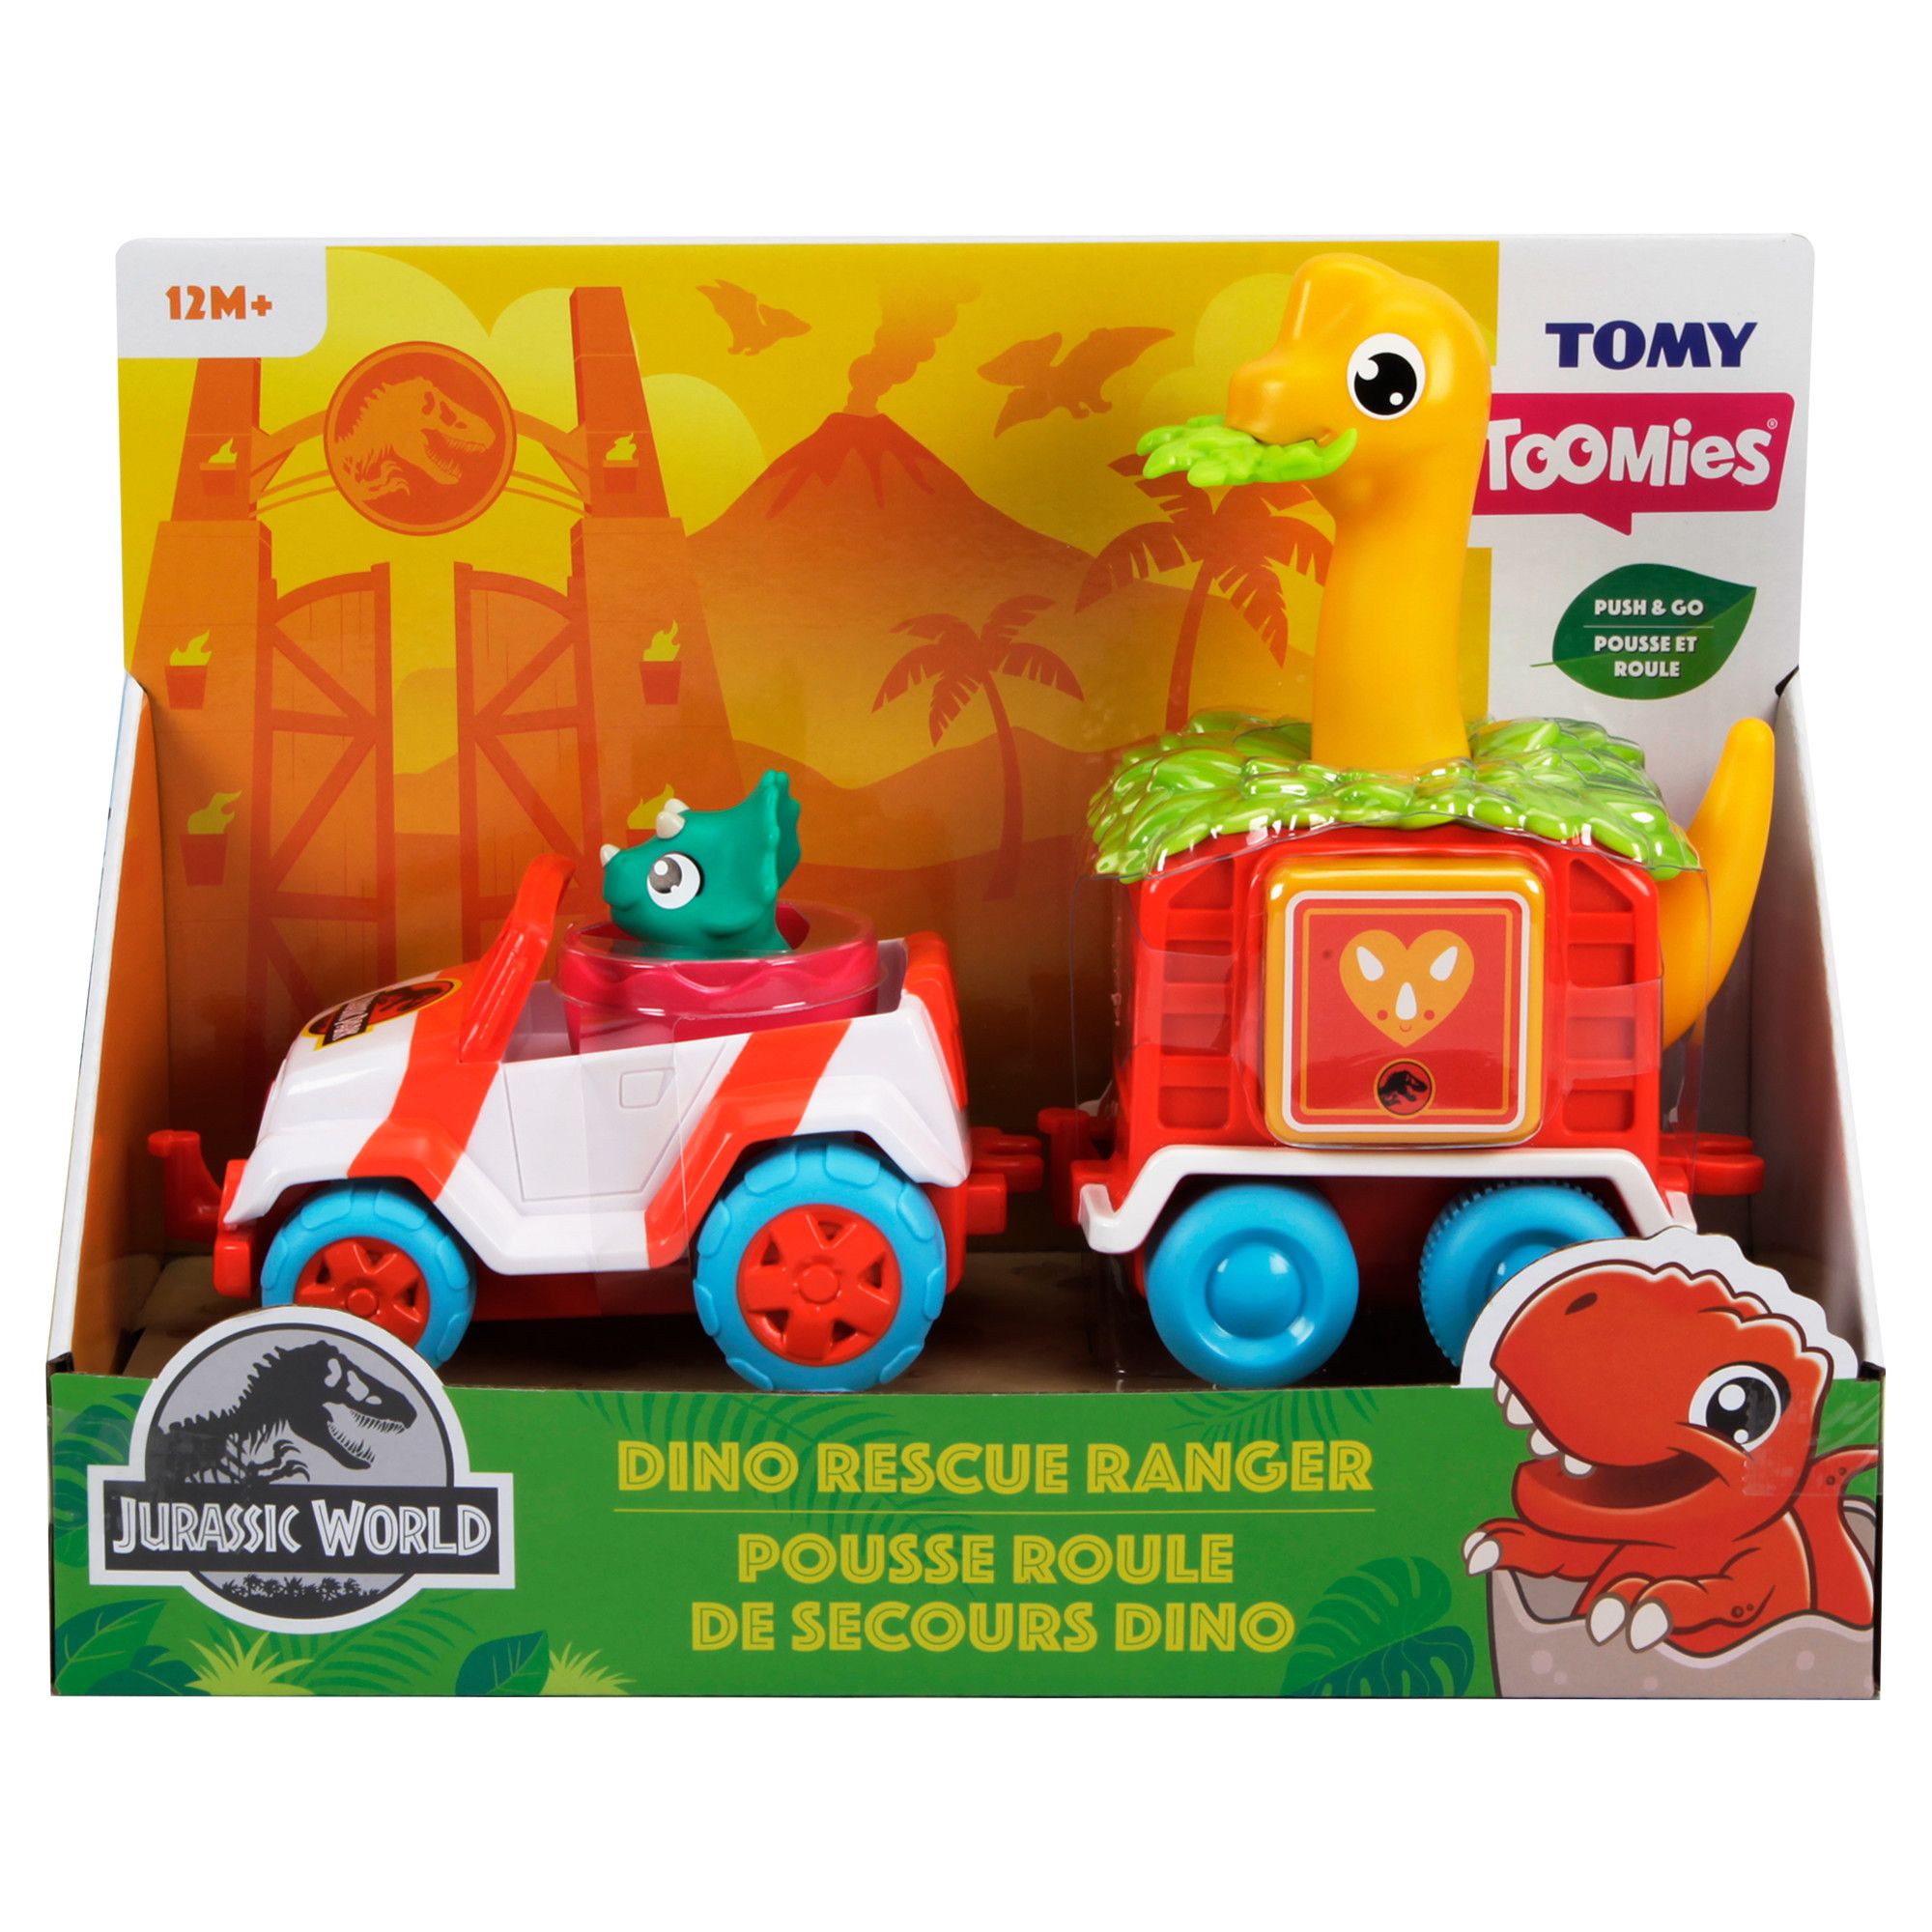 An image of Toomies Jurassic World Dino Rescue Ranger